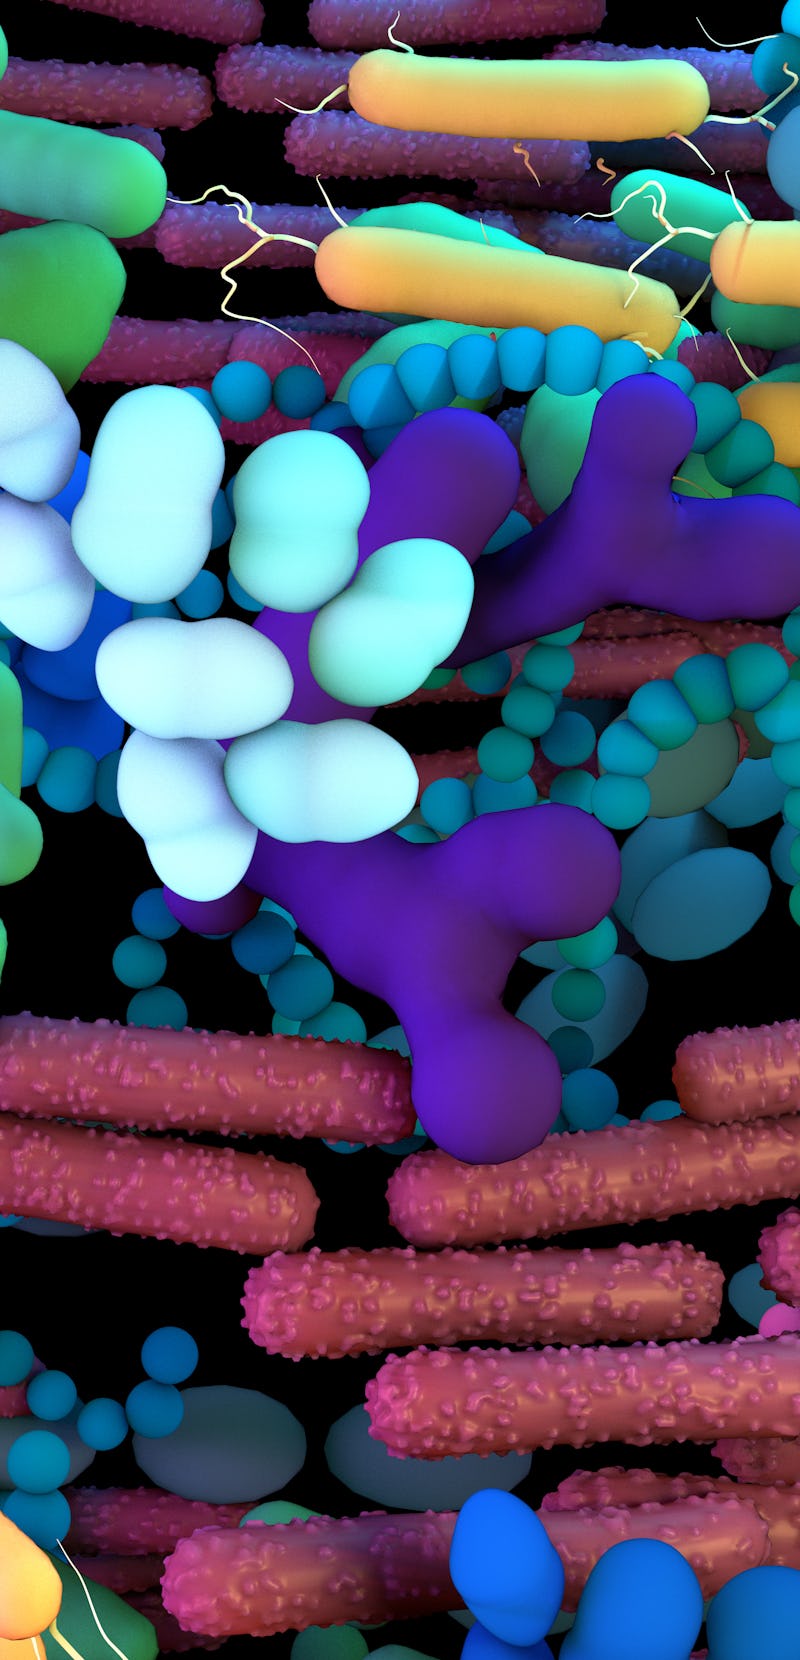 The genetic material of all the microbes that live on and inside the human body in a 3D illustration